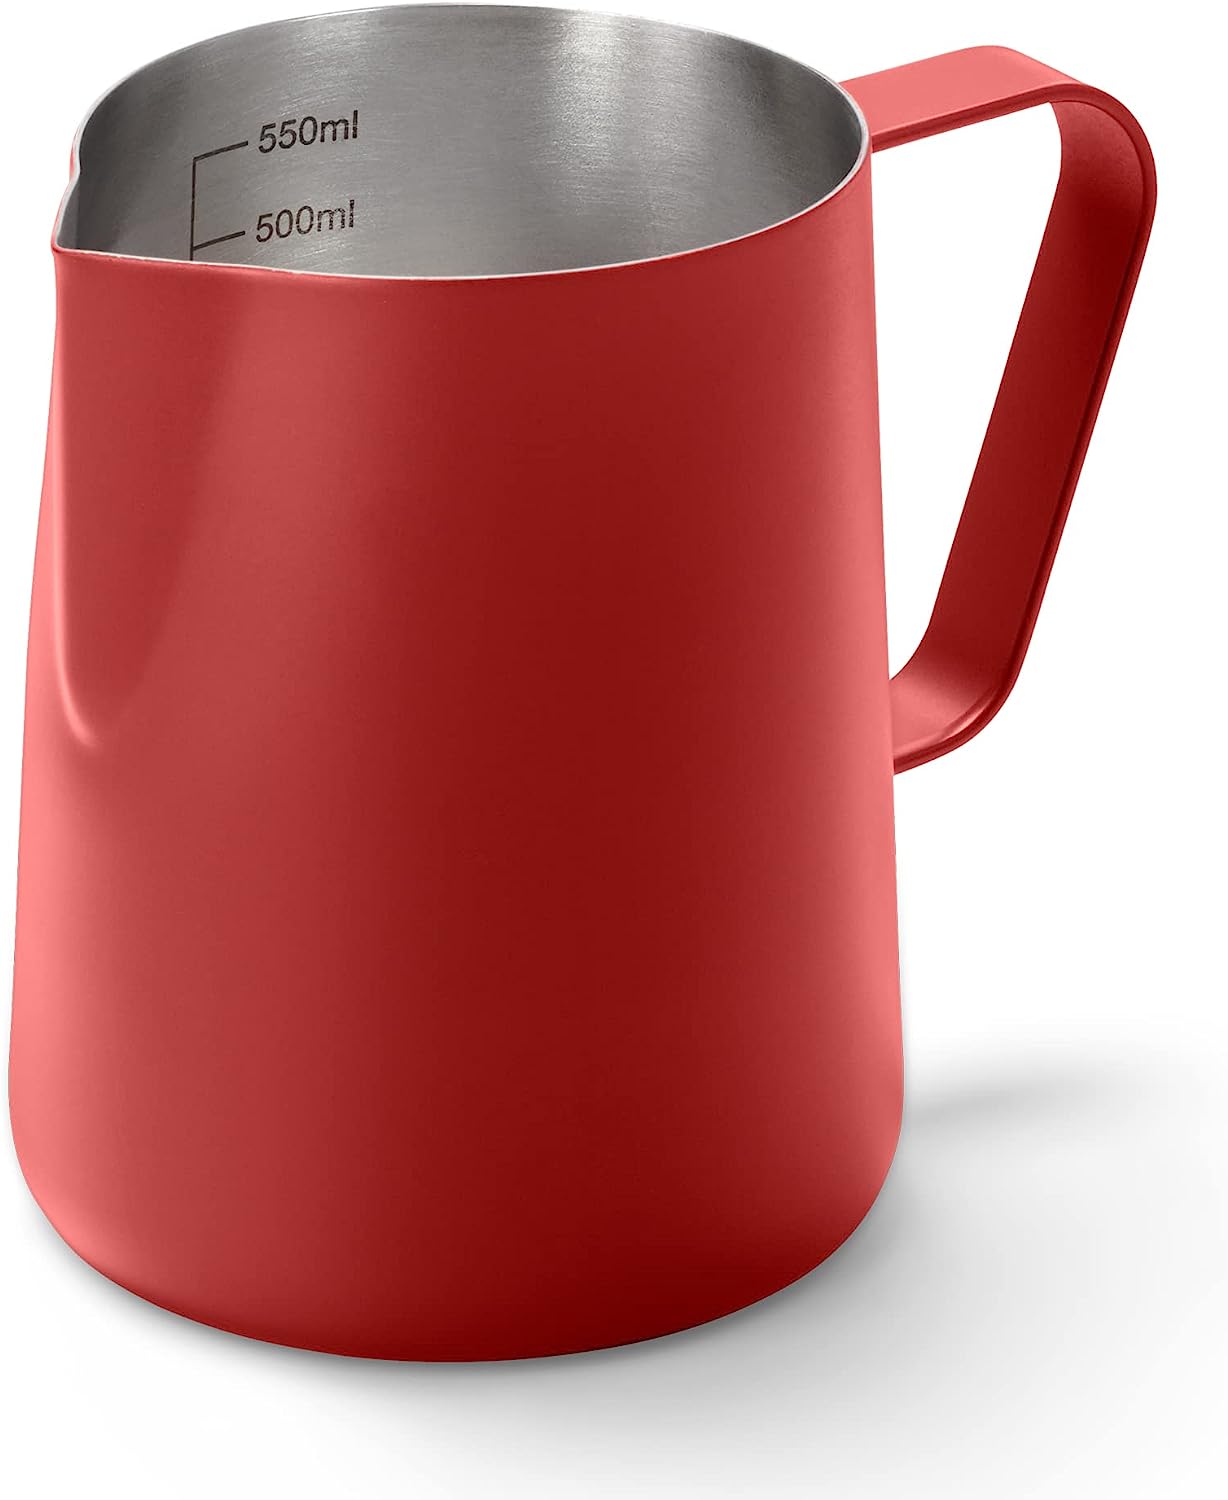 Tchibo Stainless Steel Milk Jug (600ml), Barista Manual Frothing Accessory, Red Lacquer